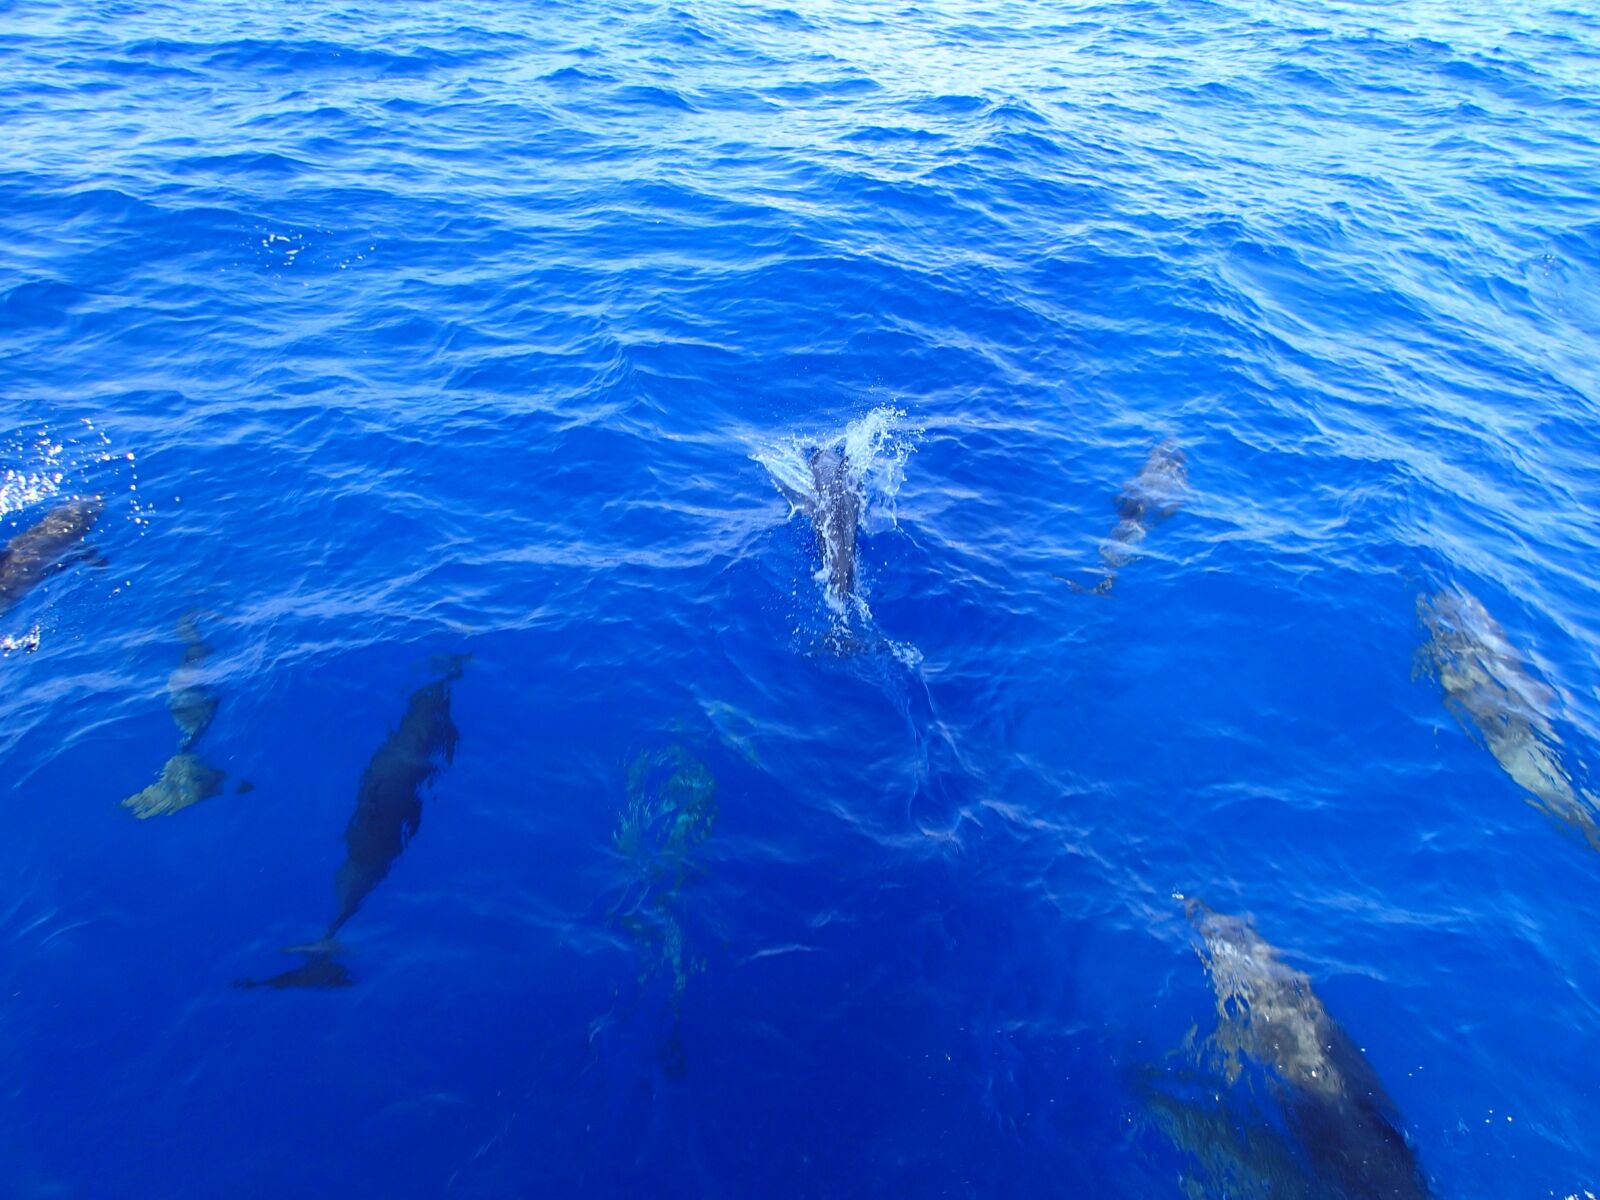 Olympus TG-1 sample photo. Dolphins, ocean, water photography